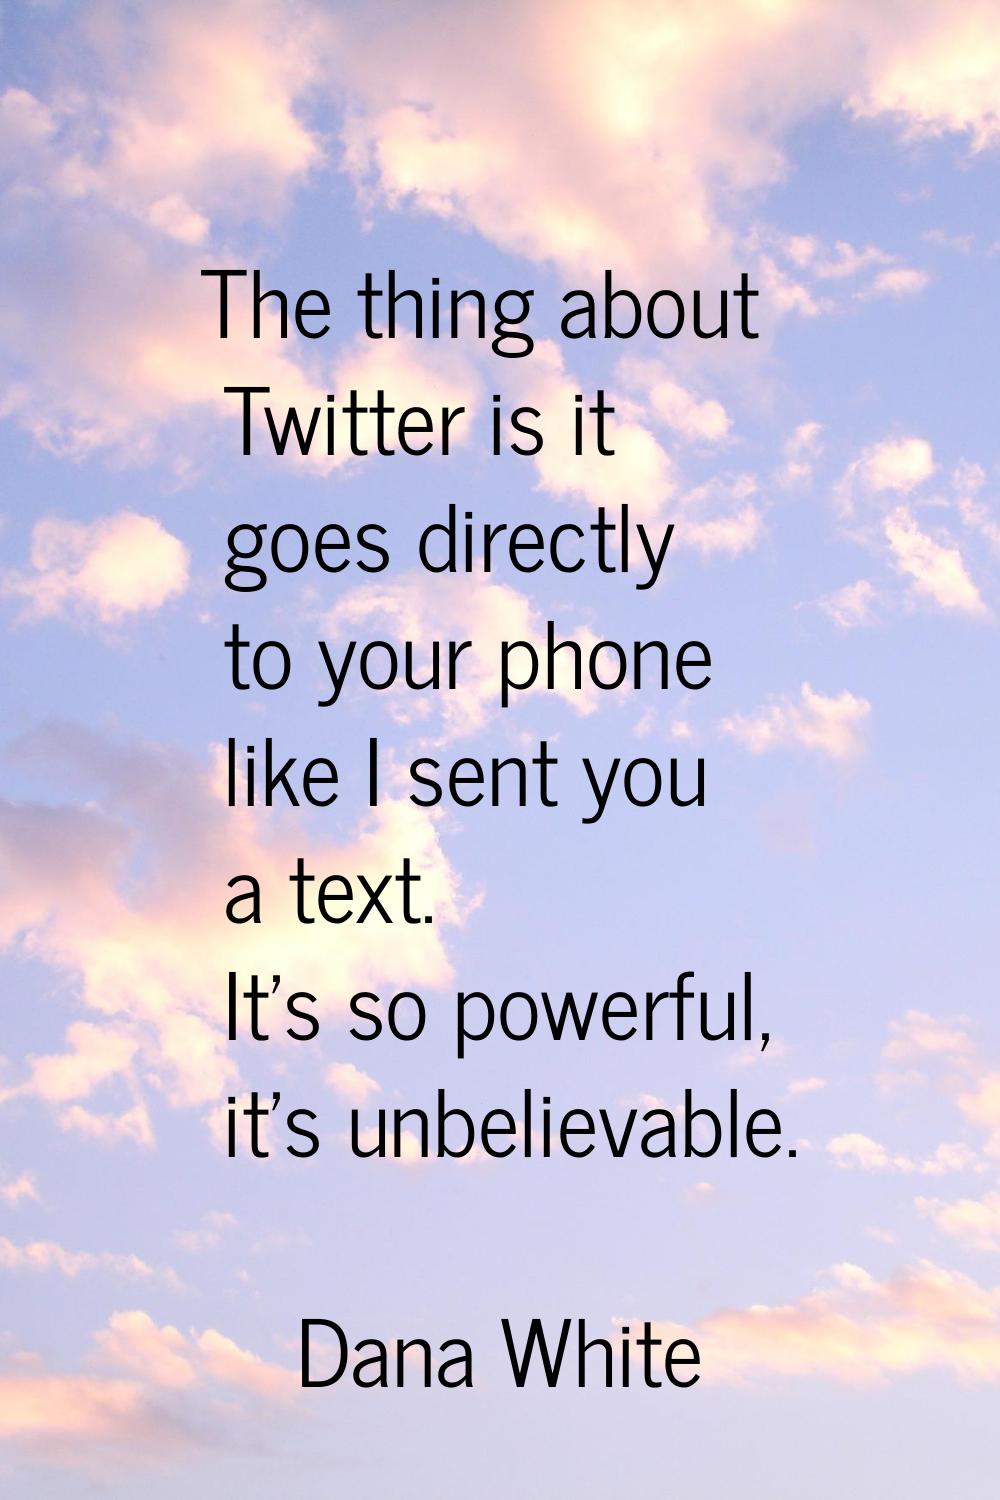 The thing about Twitter is it goes directly to your phone like I sent you a text. It's so powerful,